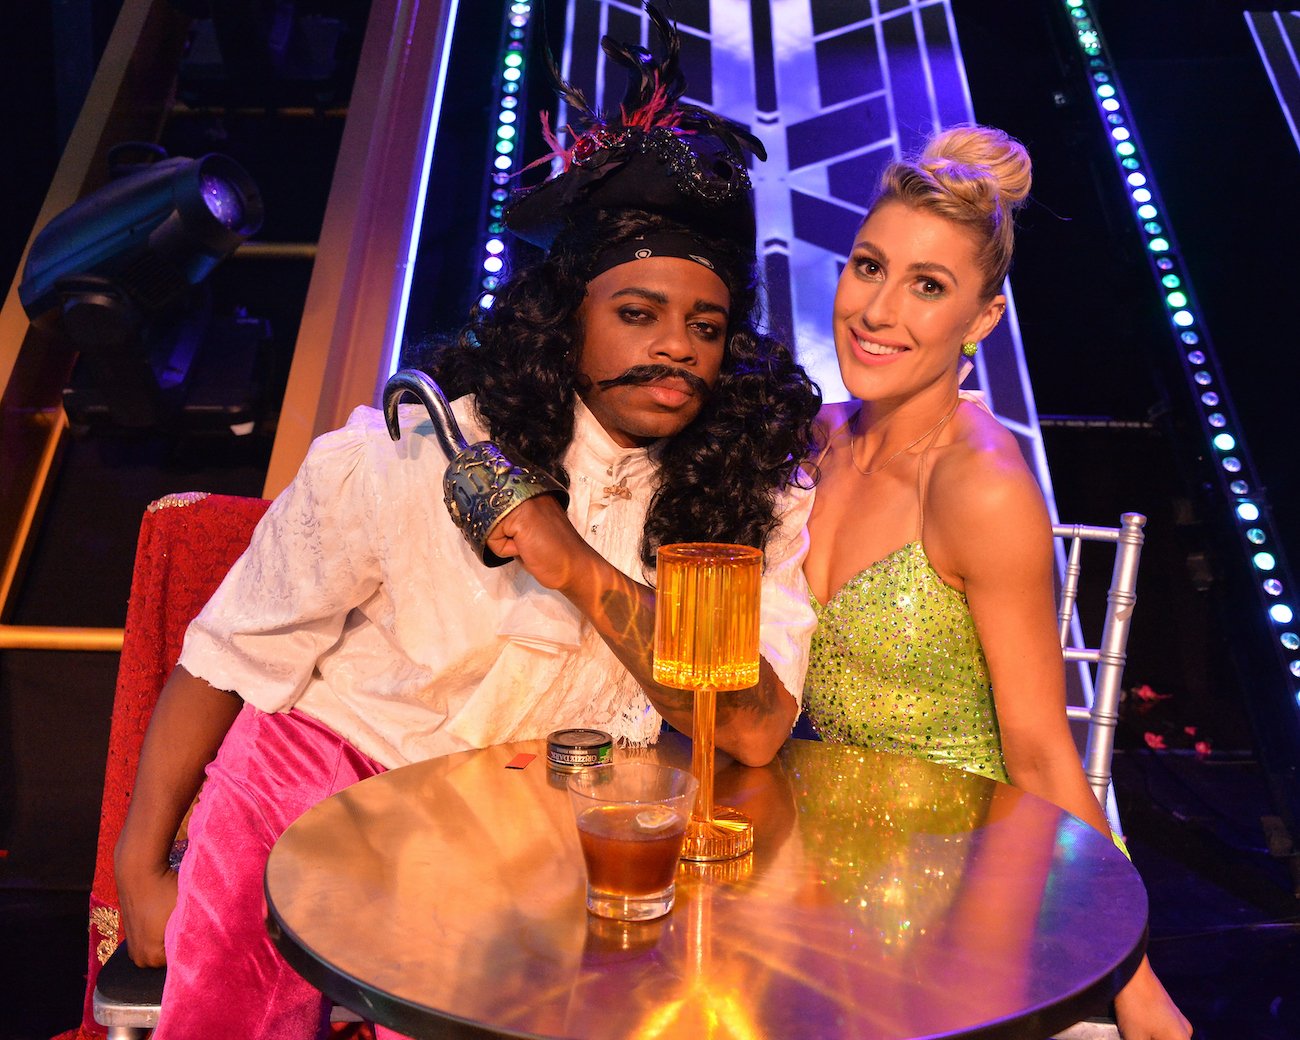 Jimmie Allen in a Captain Hook costume sitting next to his 'Dancing with the Stars' pro partner Emma Slater, who is dressed as Tinkerbell 